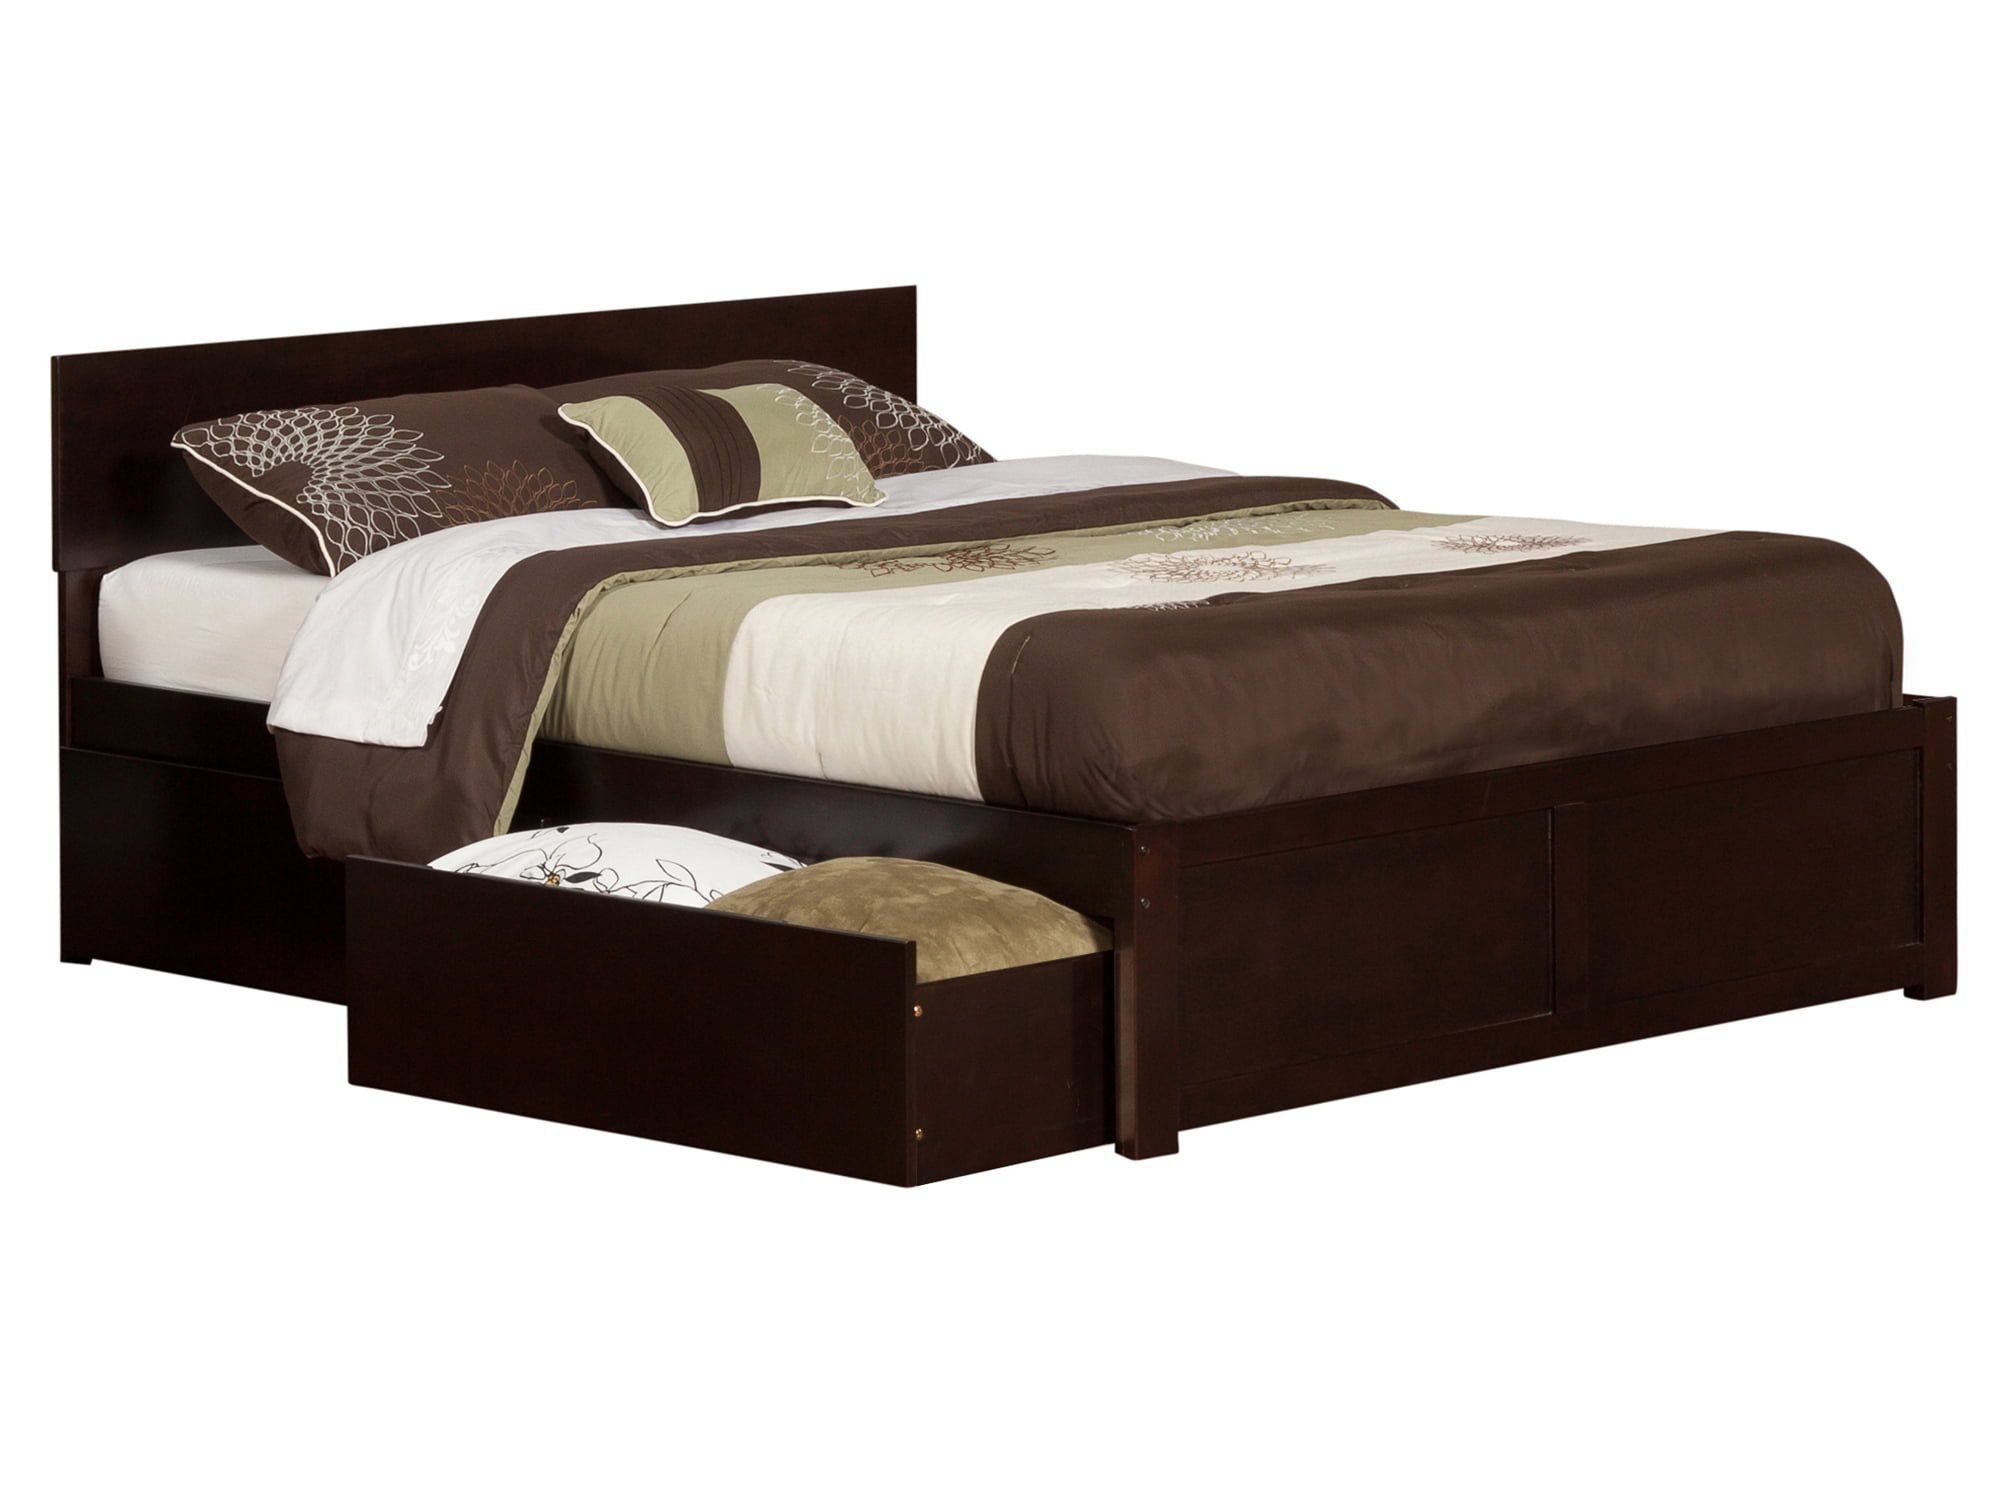 Ar8152111 Orlando Flat Panel Foot Board With Urban Bed Drawers, Espresso - King